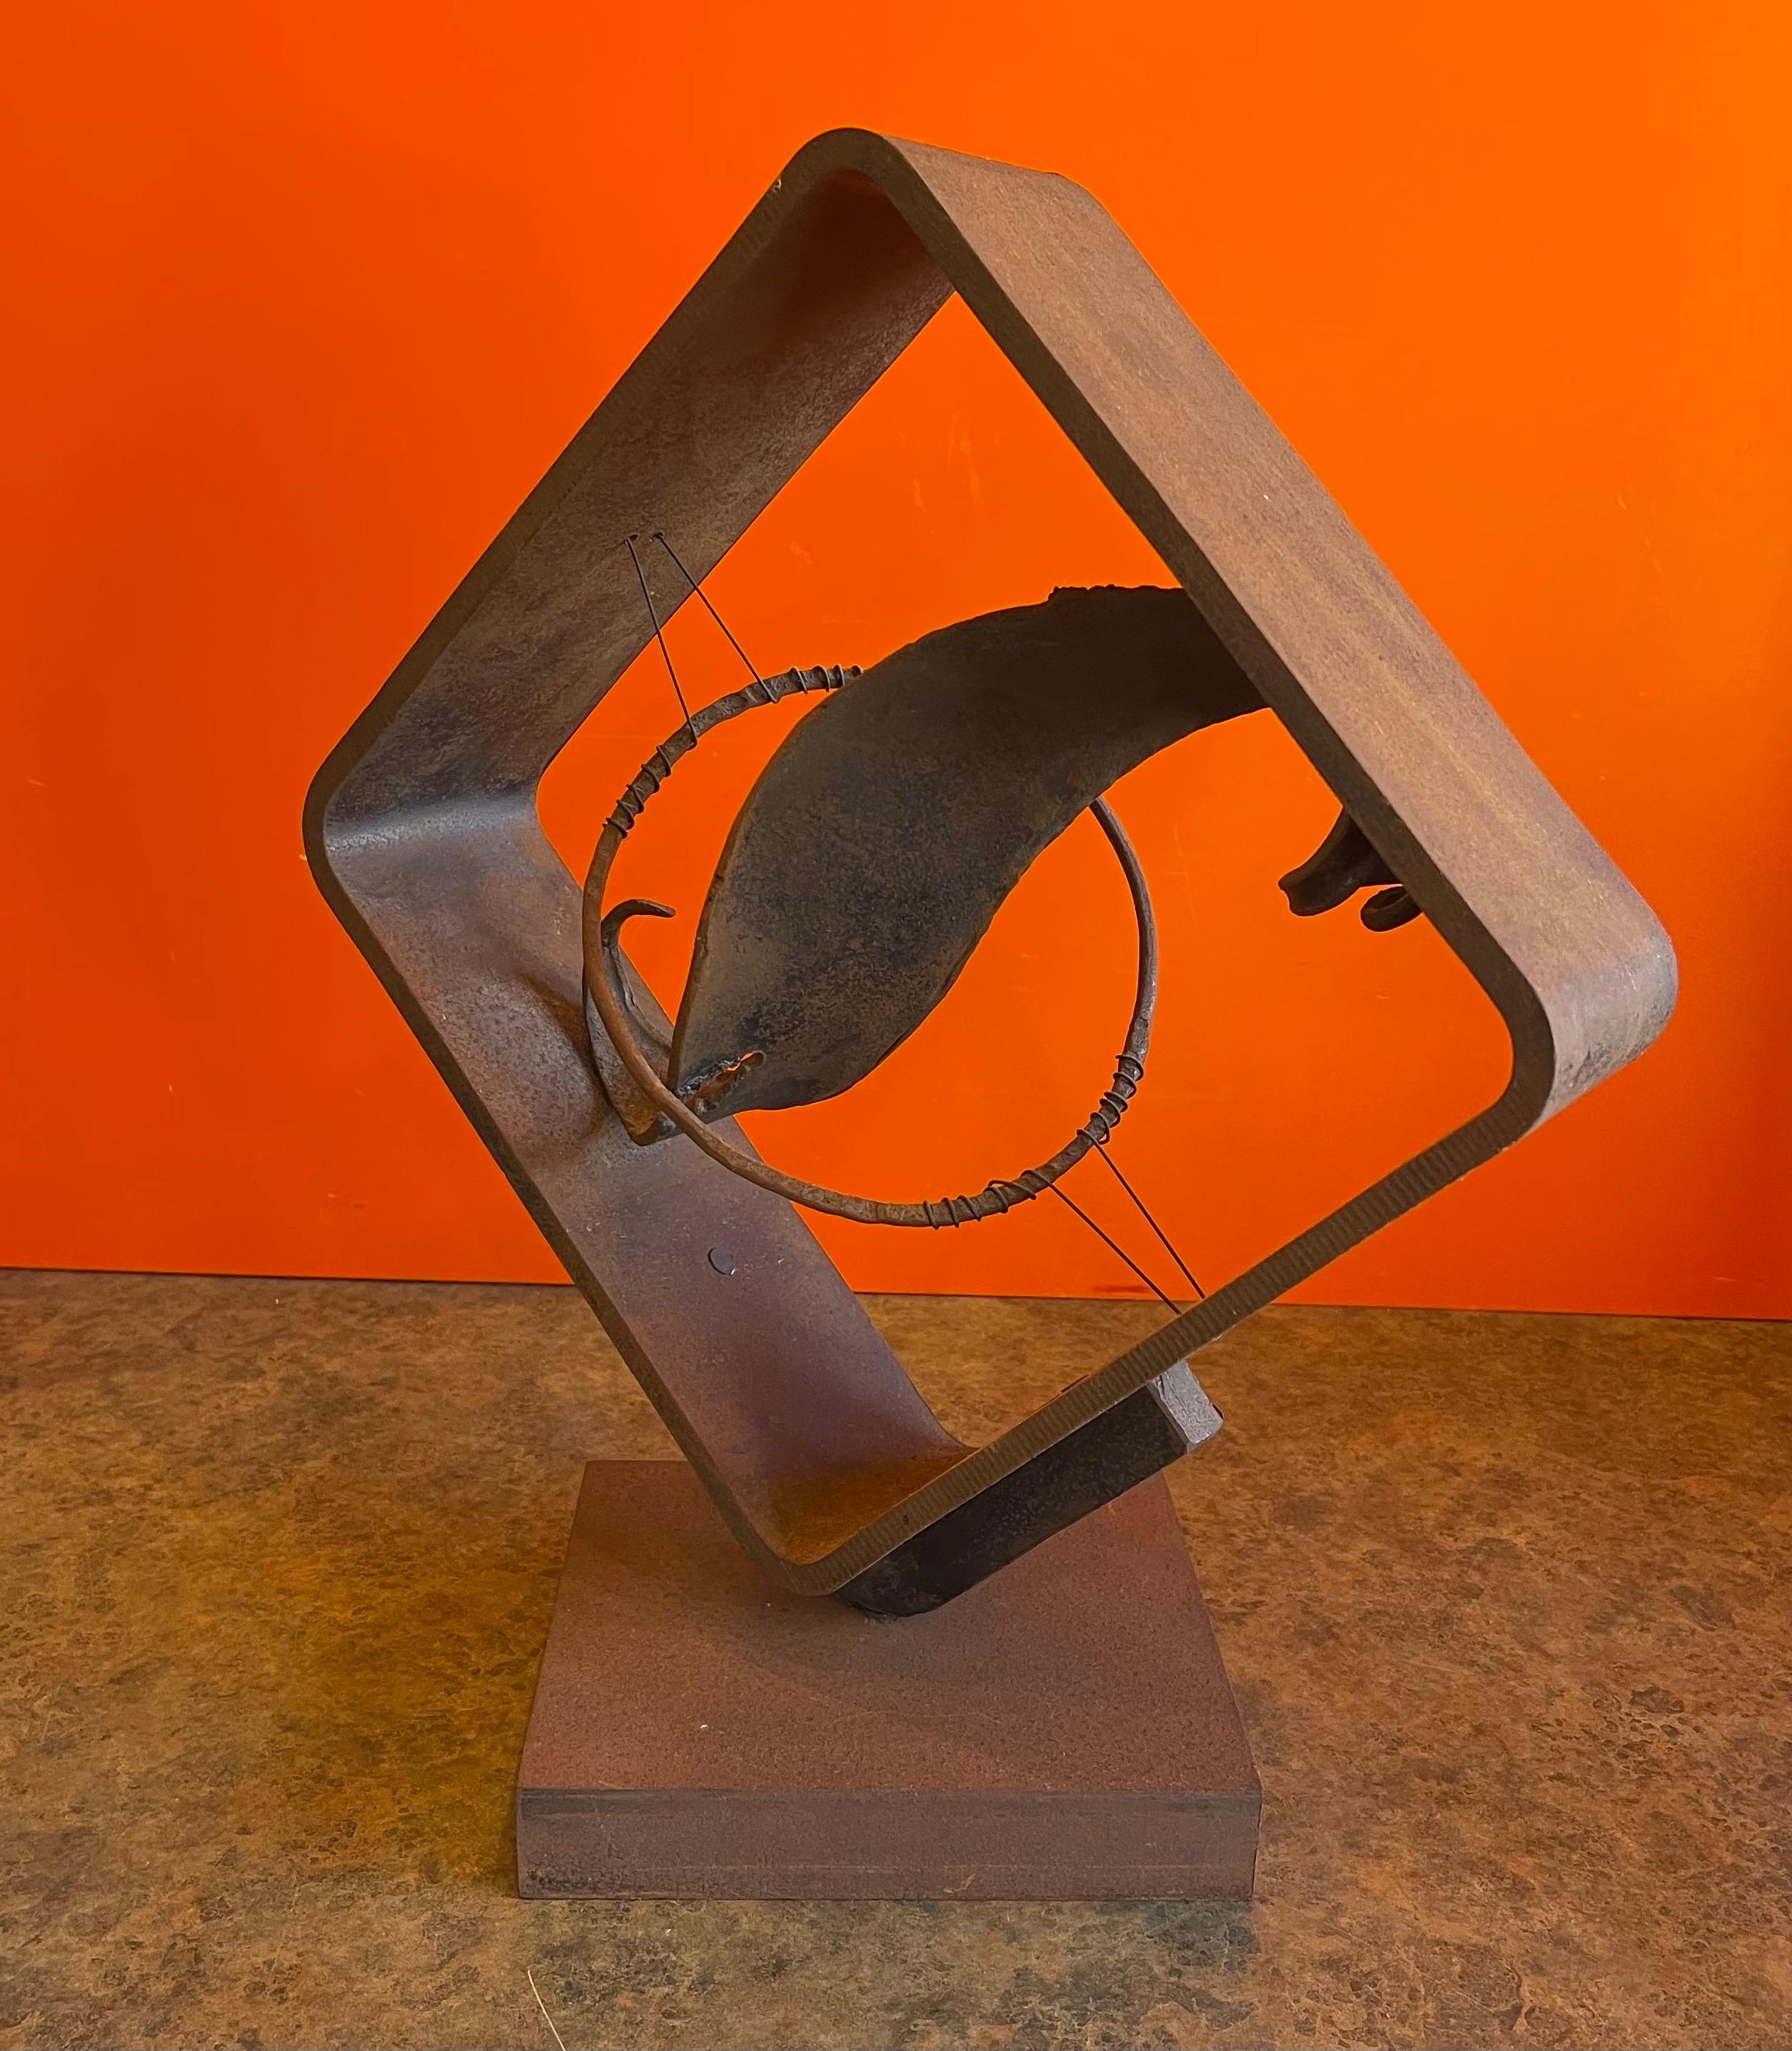 A very cool MCM cut steel rotating abstract sculpture by James Hubbell, circa 1970s. The sculptural piece is made of dark cut steel that is welded into a diamond shape on a heavy steel base. The piece is in good condition with a vintage patina and